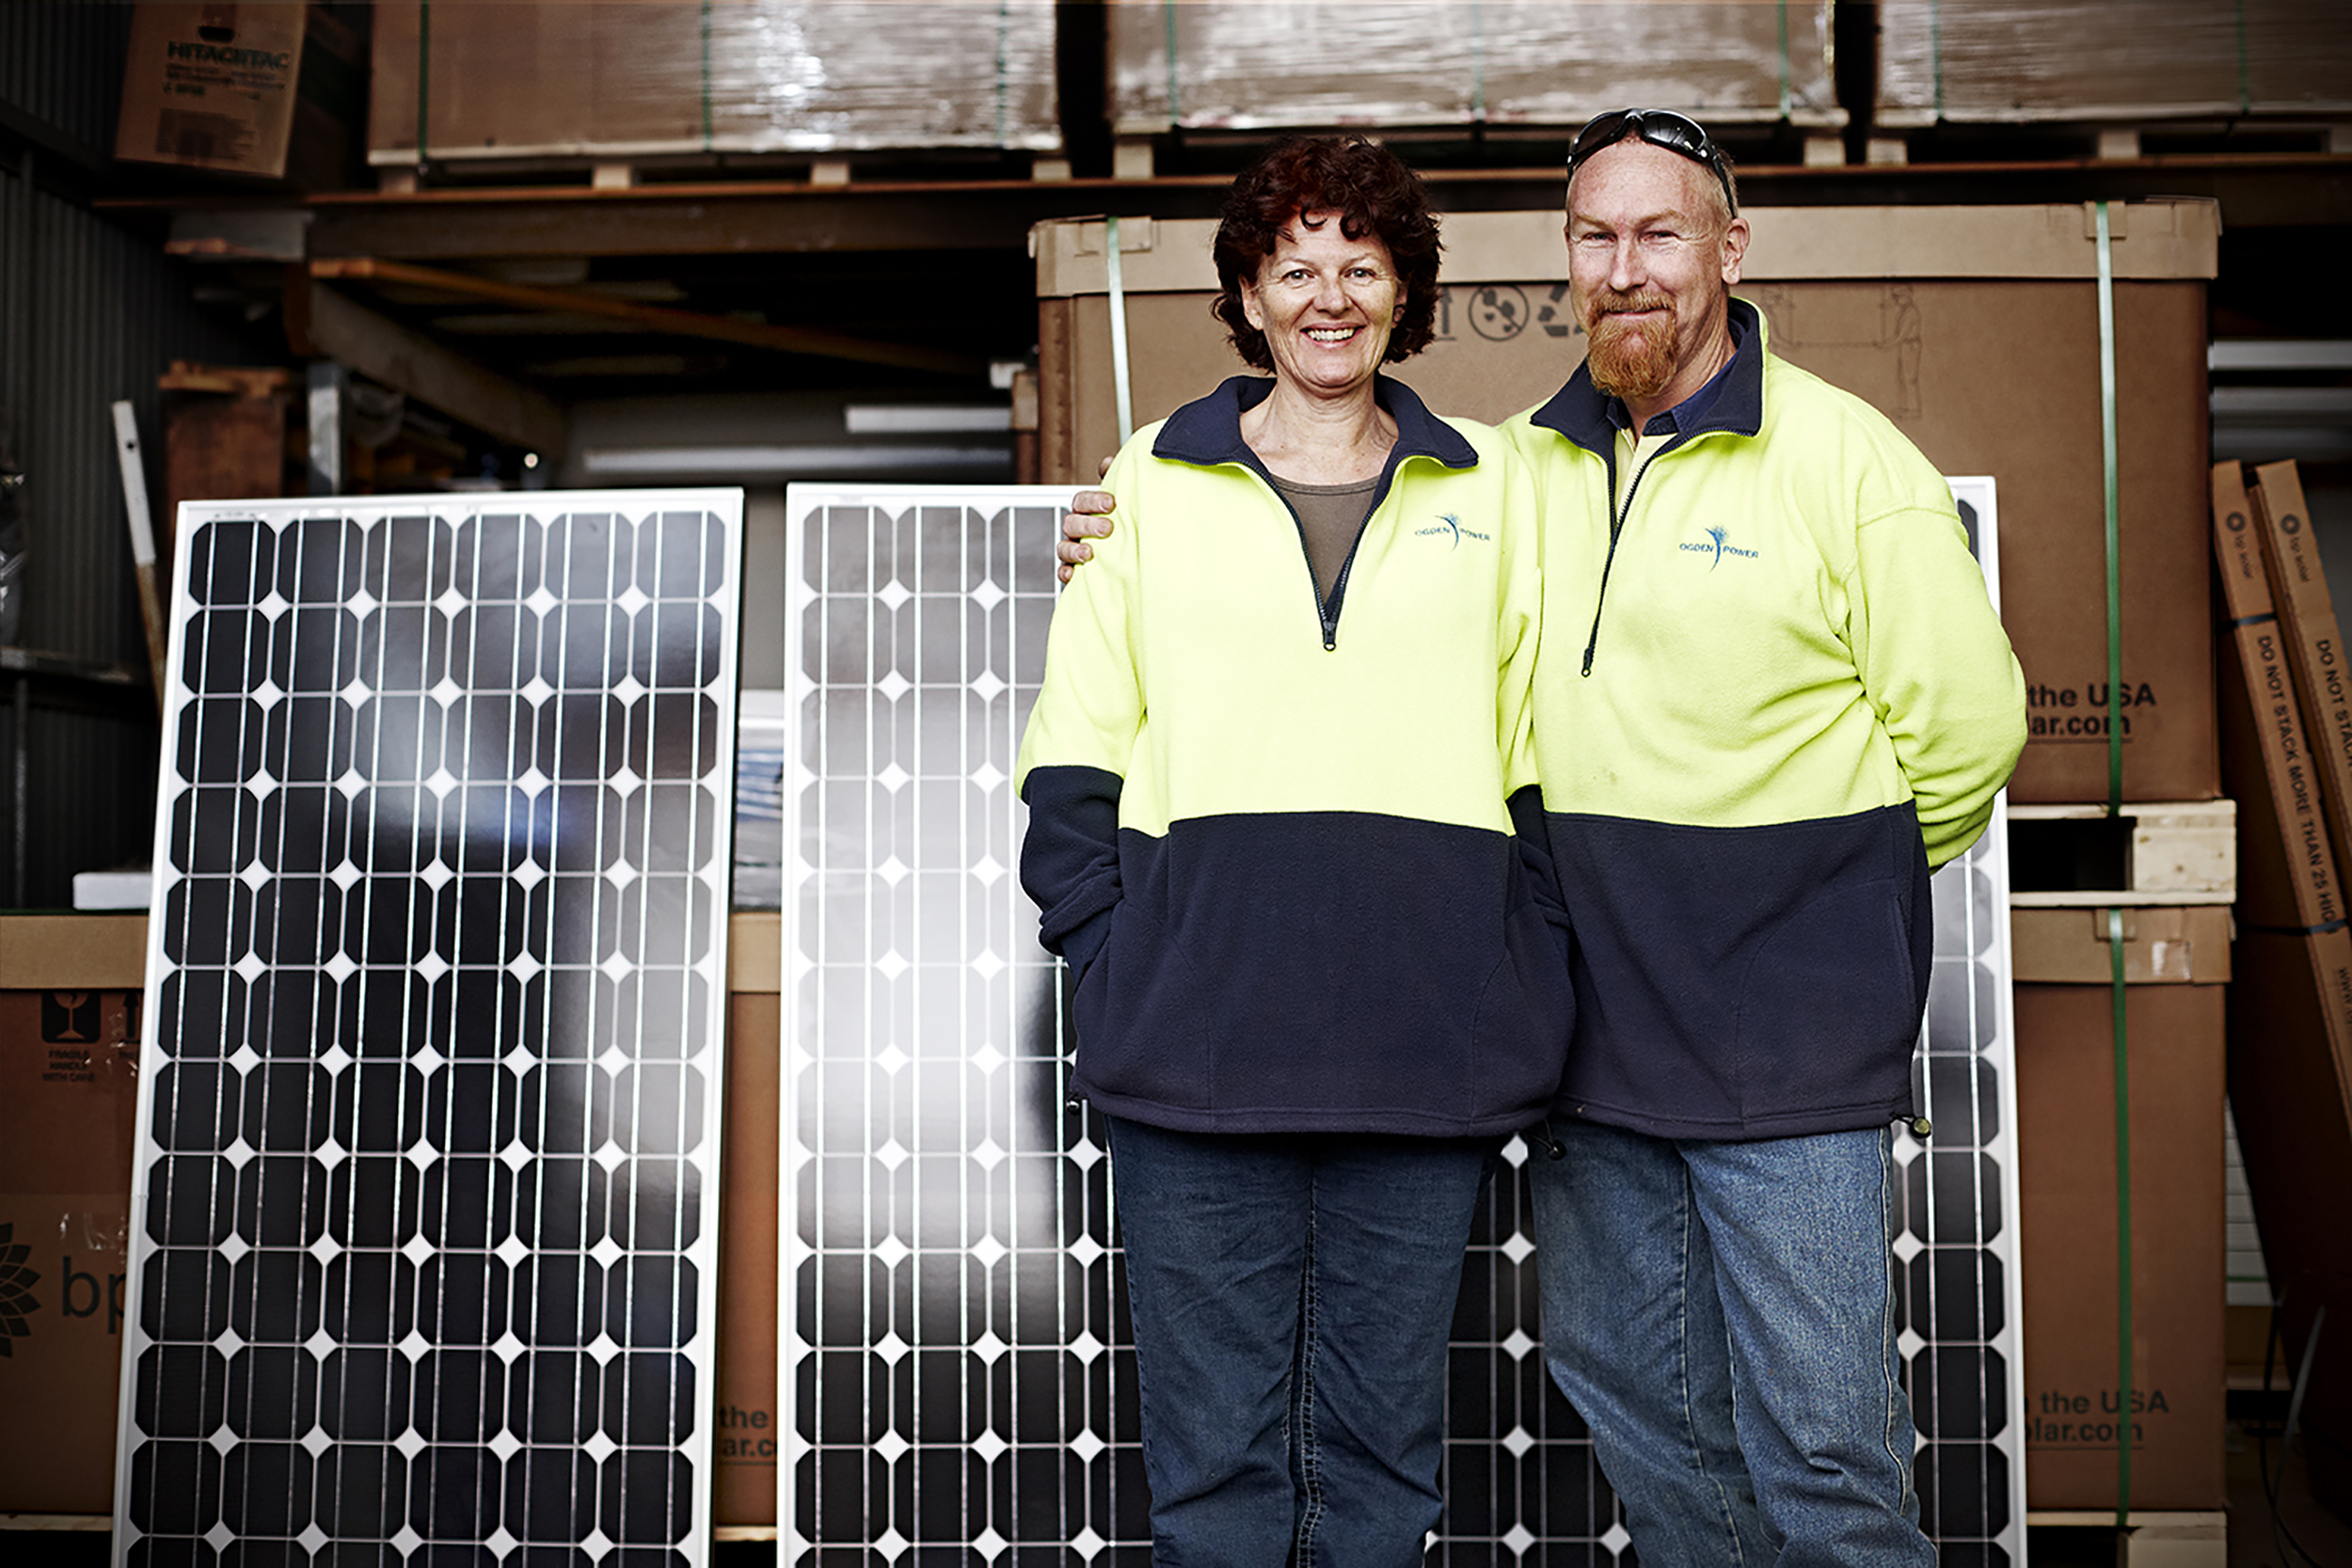 Campaign-thom-rigney-professional-photographer-advertising-commissioned-energy-mining-renewables-australia-tradesman-industry-020